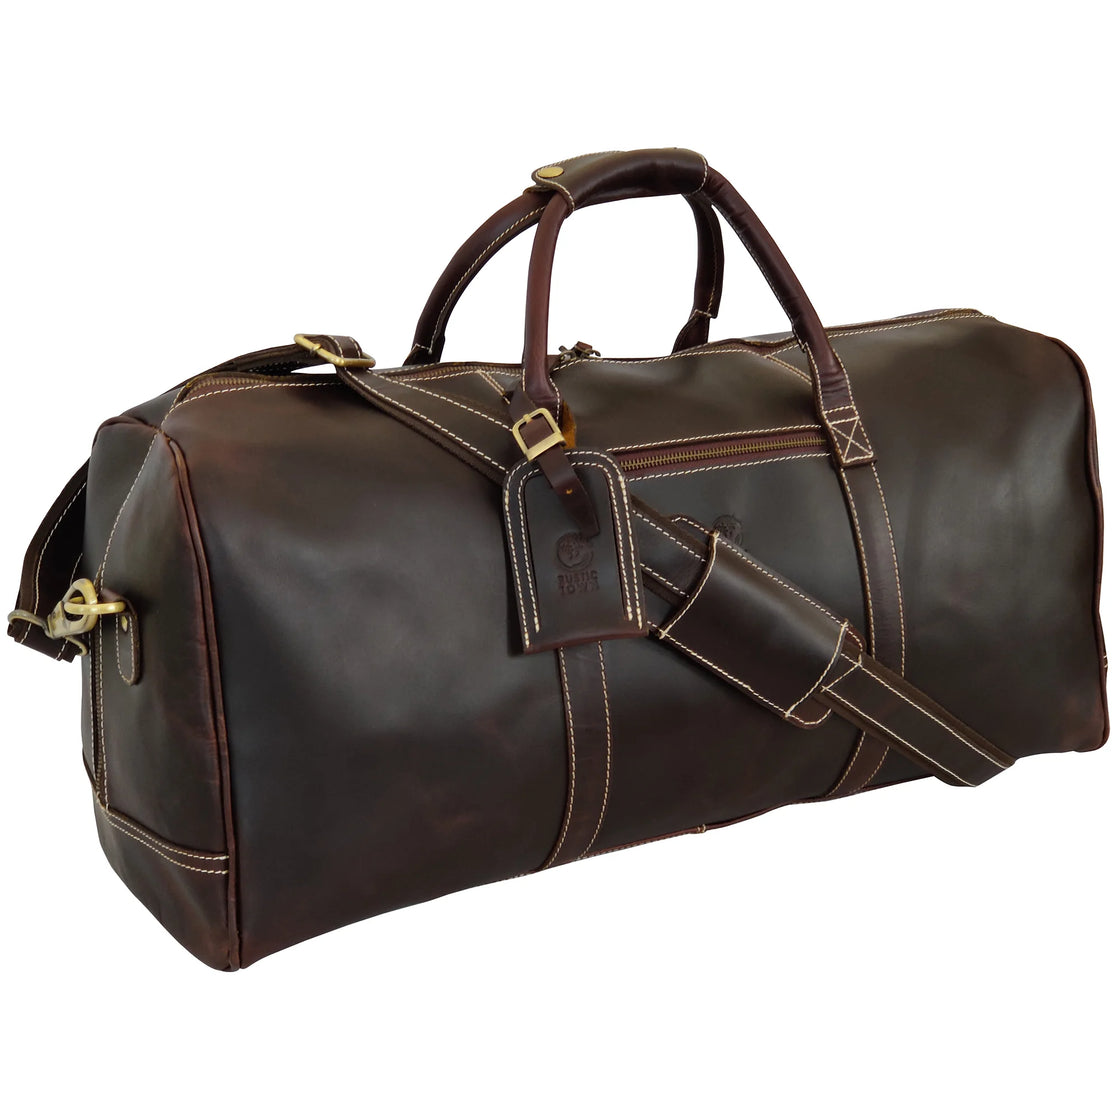 Roadstar Overnight Weekender Carry On Duffel Bag (24 Inches, Walnut Br –  Rustic Town